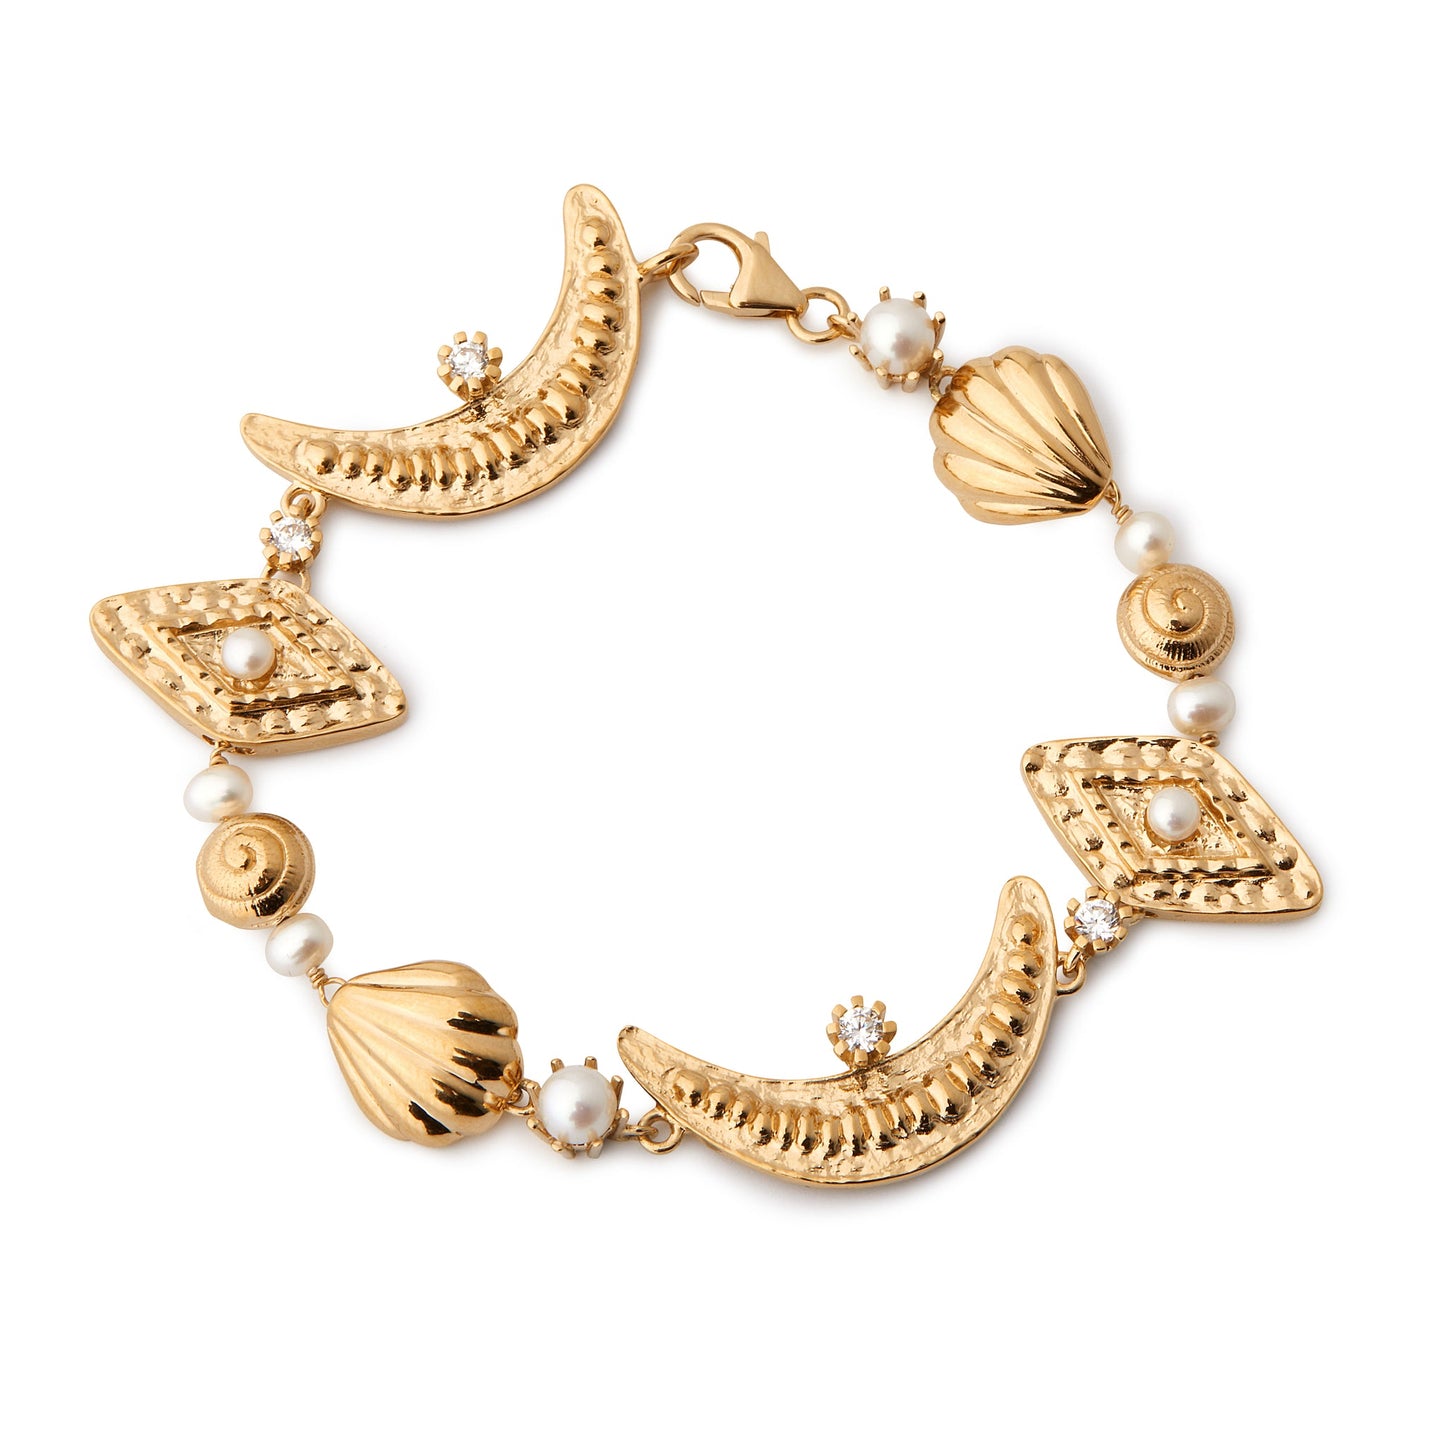 Ocean & Moon - Bracelet - Gold Plated Silver - With Pearls and Cubic Zirconia